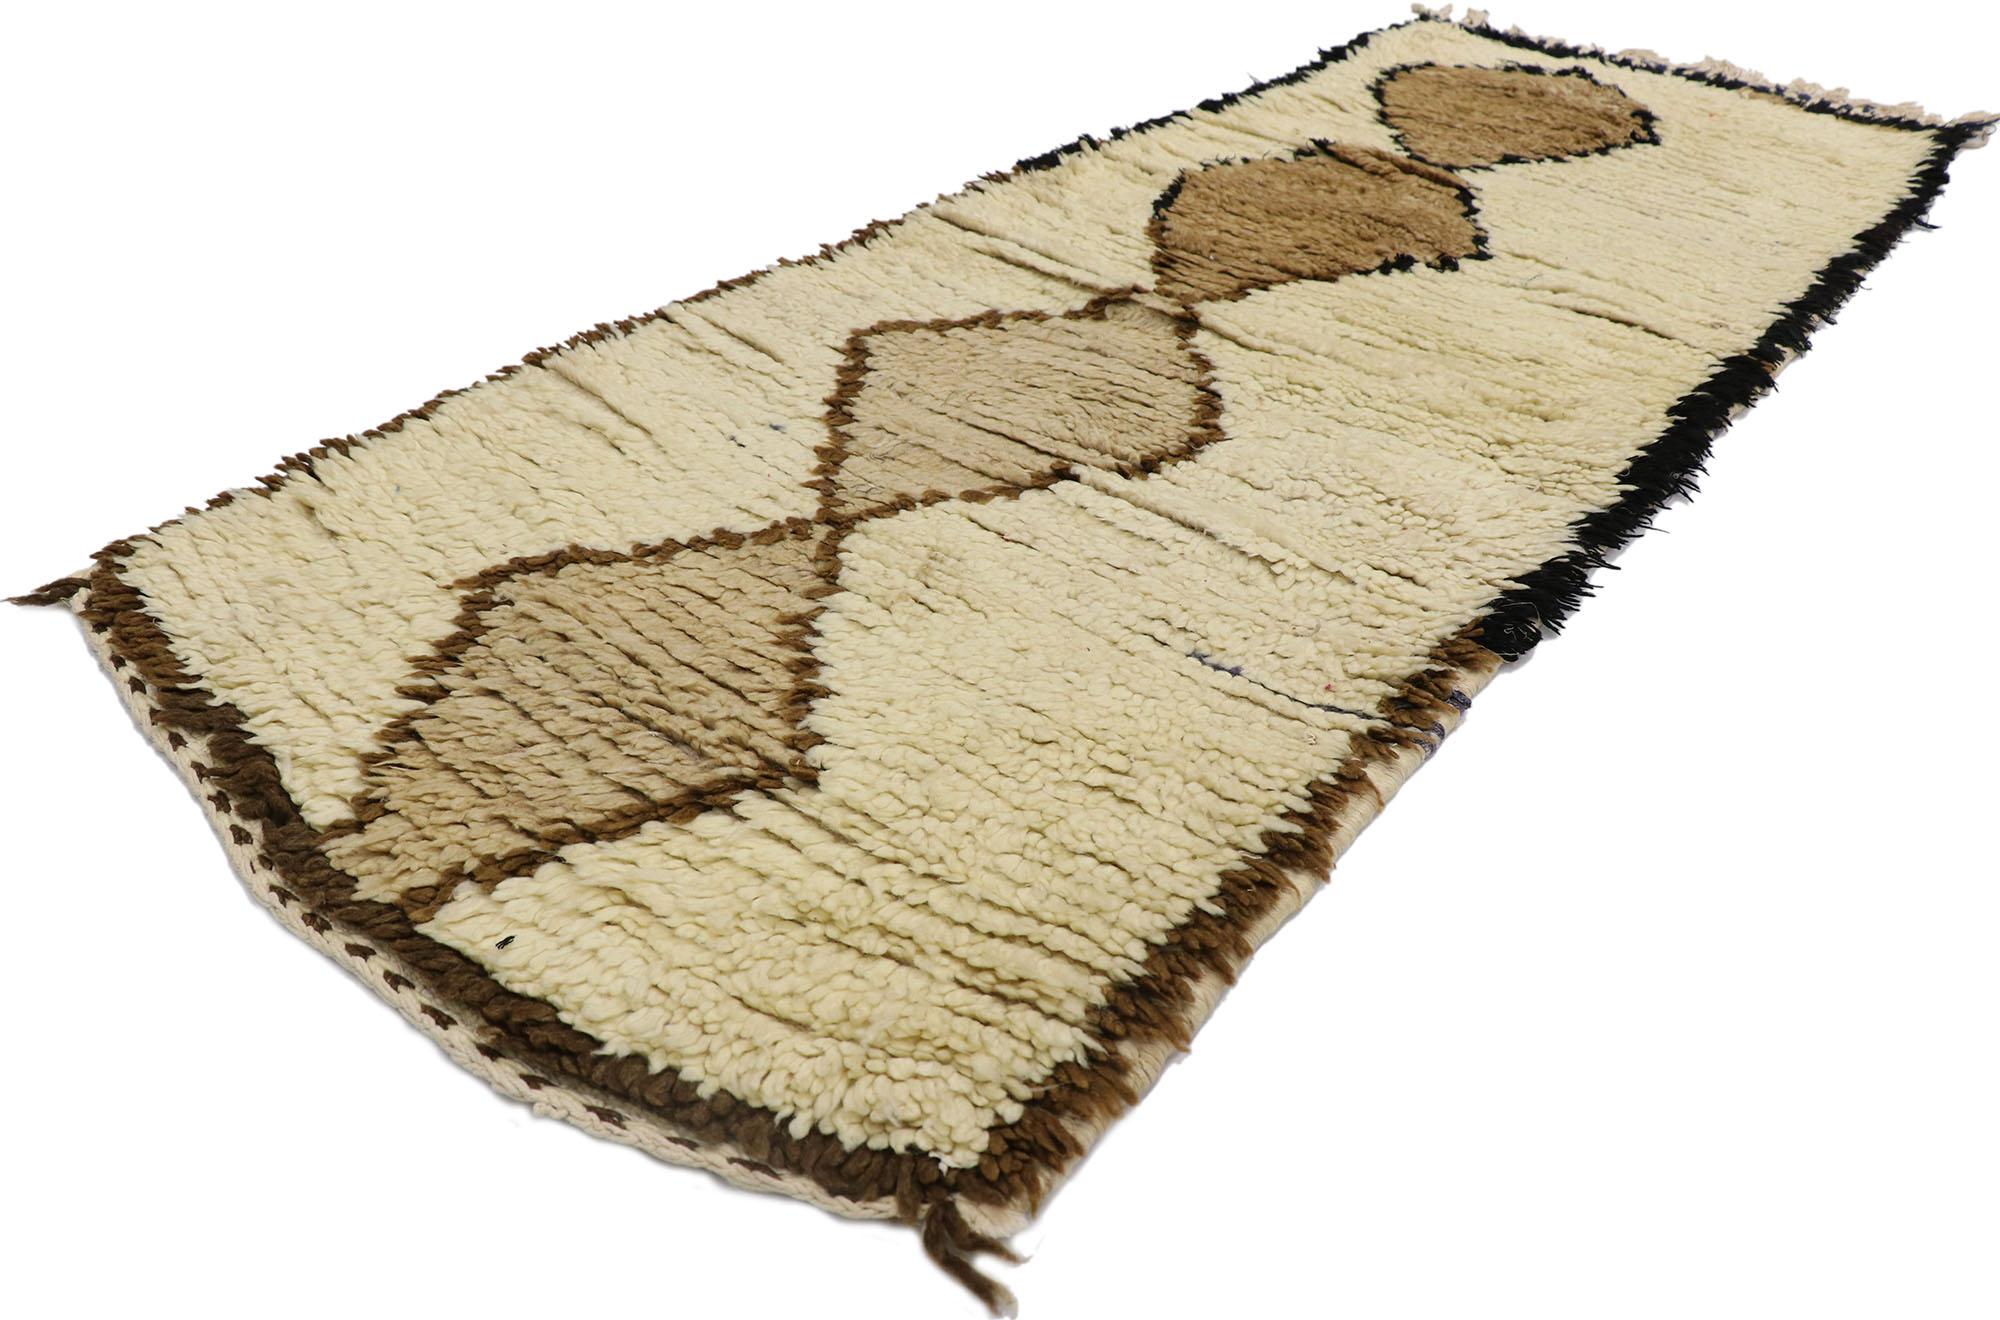 21660 vintage Berber Moroccan Azilal rug with Mid-Century Modern style 02'03 x 05'10. With its simplicity, Mid-Century Modern style, incredible detail and texture, this hand knotted wool vintage Berber Moroccan Azilal rug is a captivating vision of